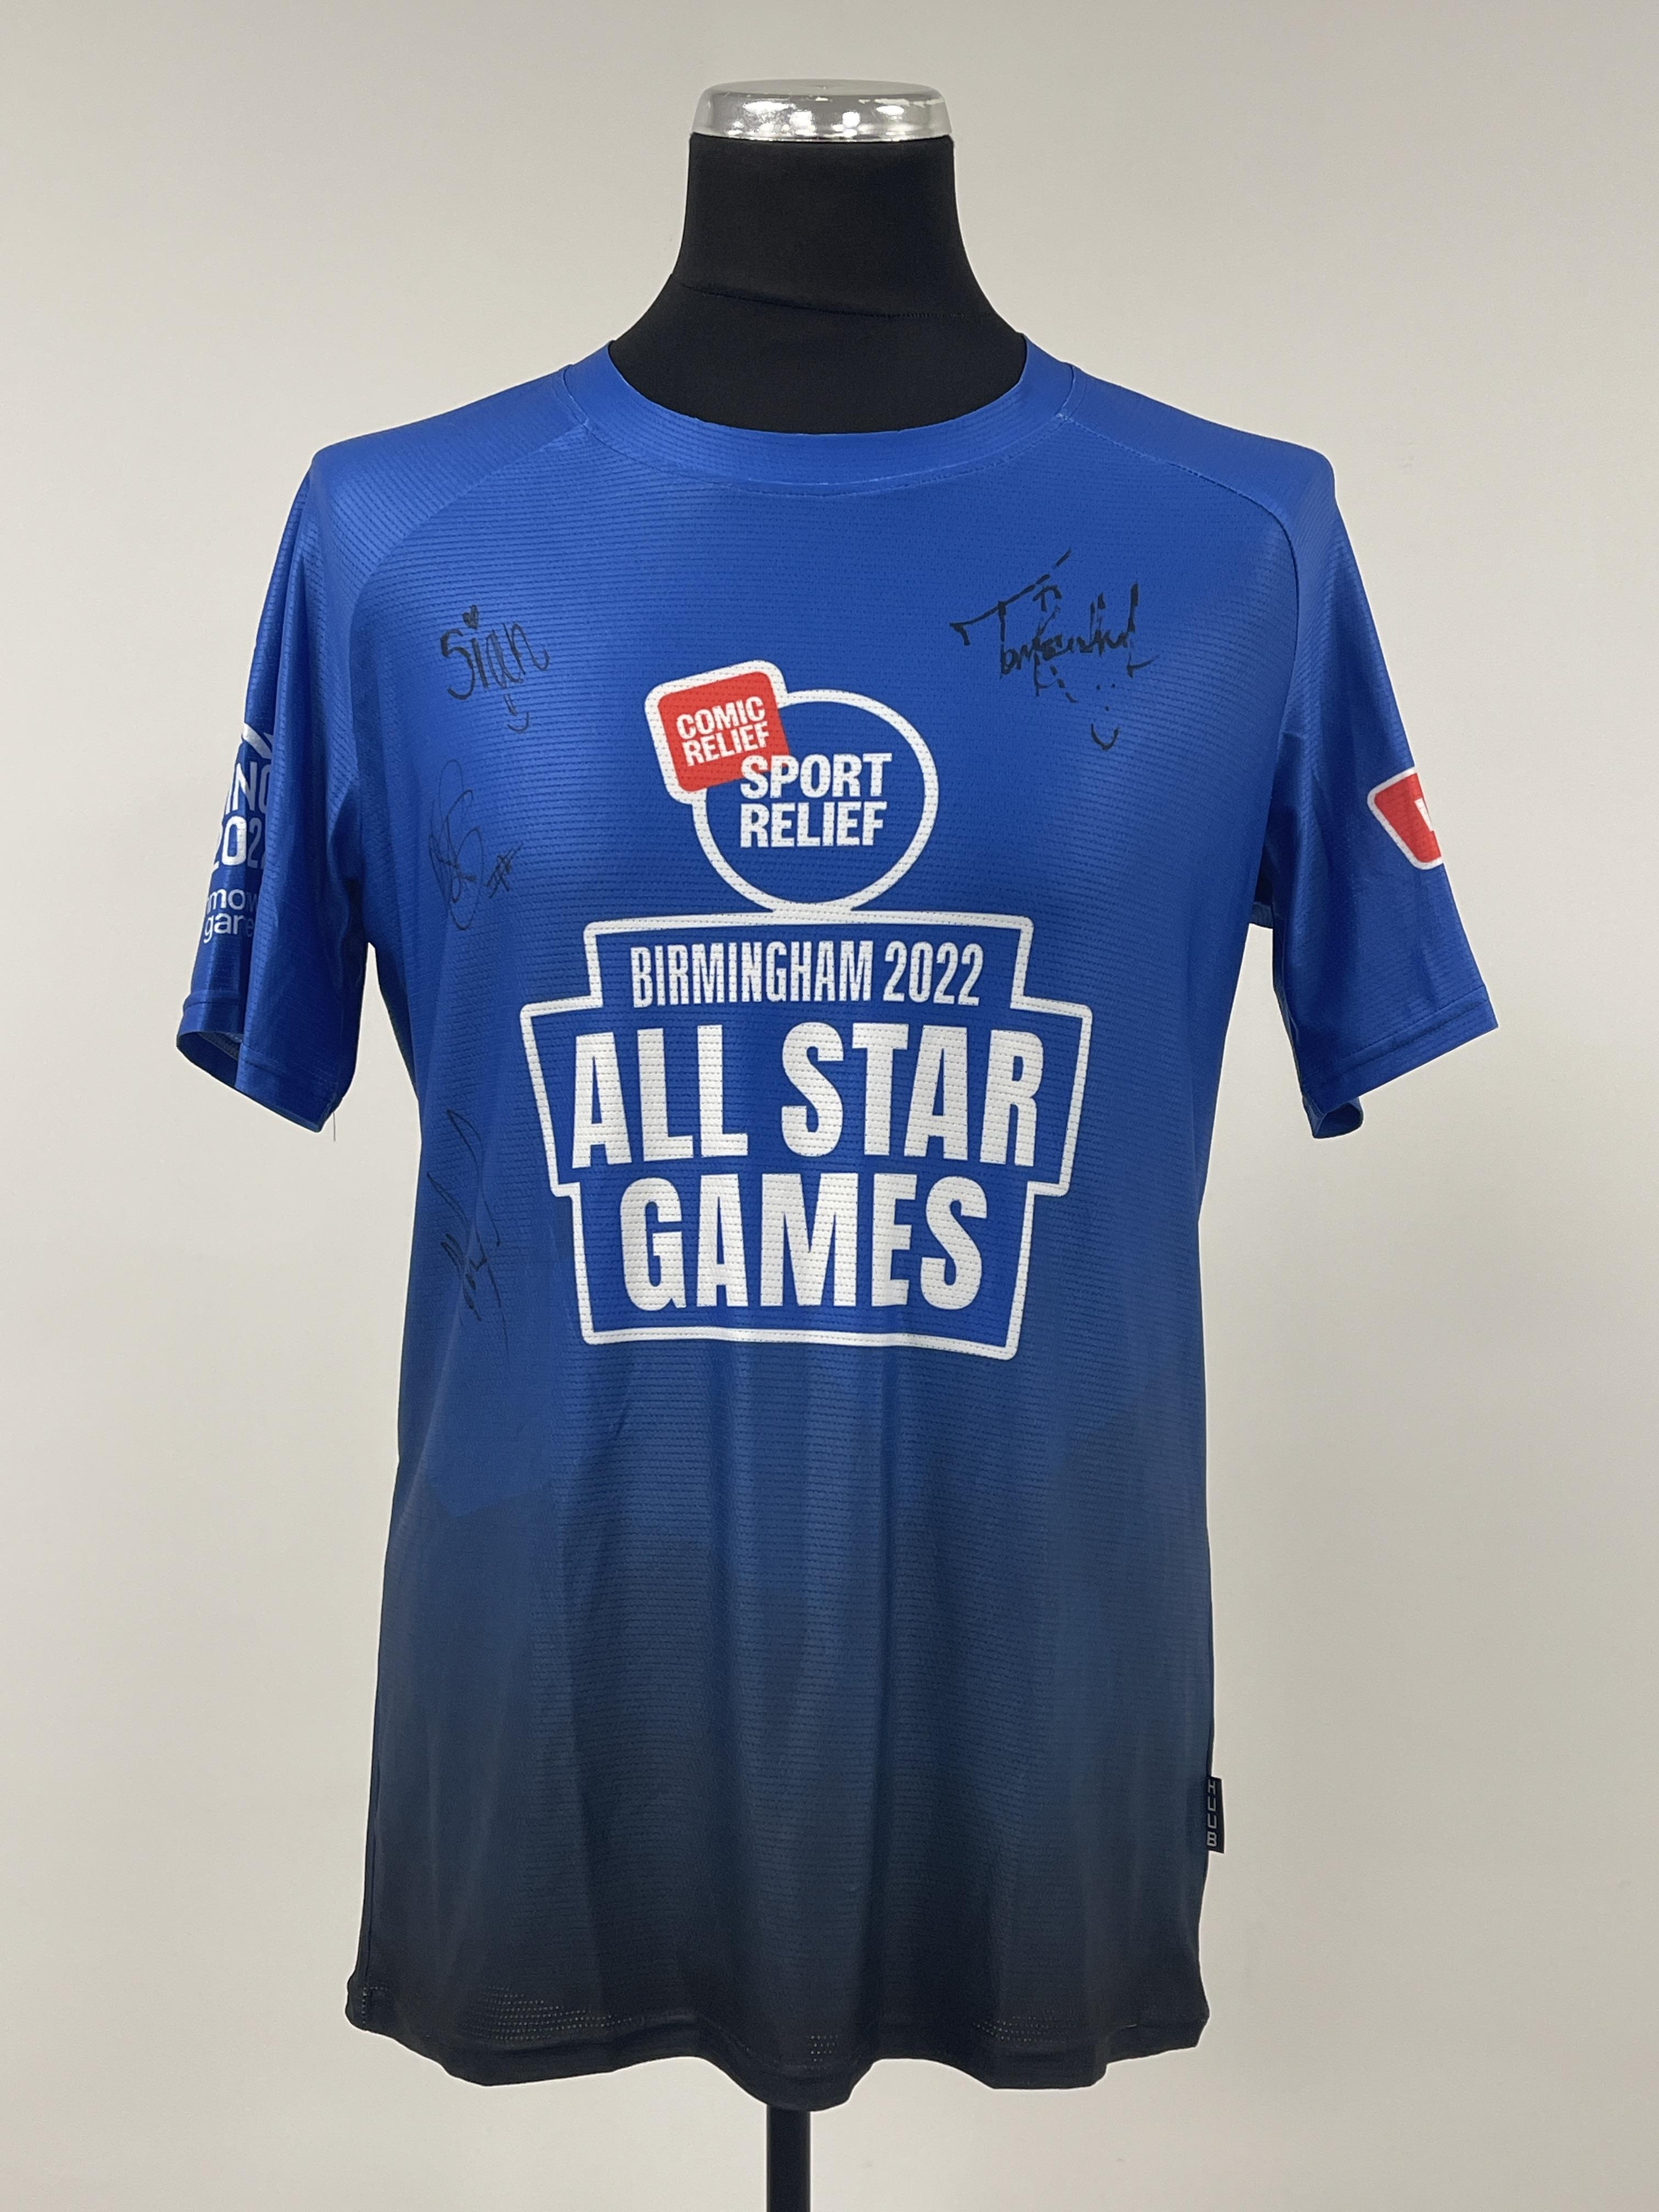 B2022 All Star Games Table Tennis T-Shirt - Signed by Blue Team